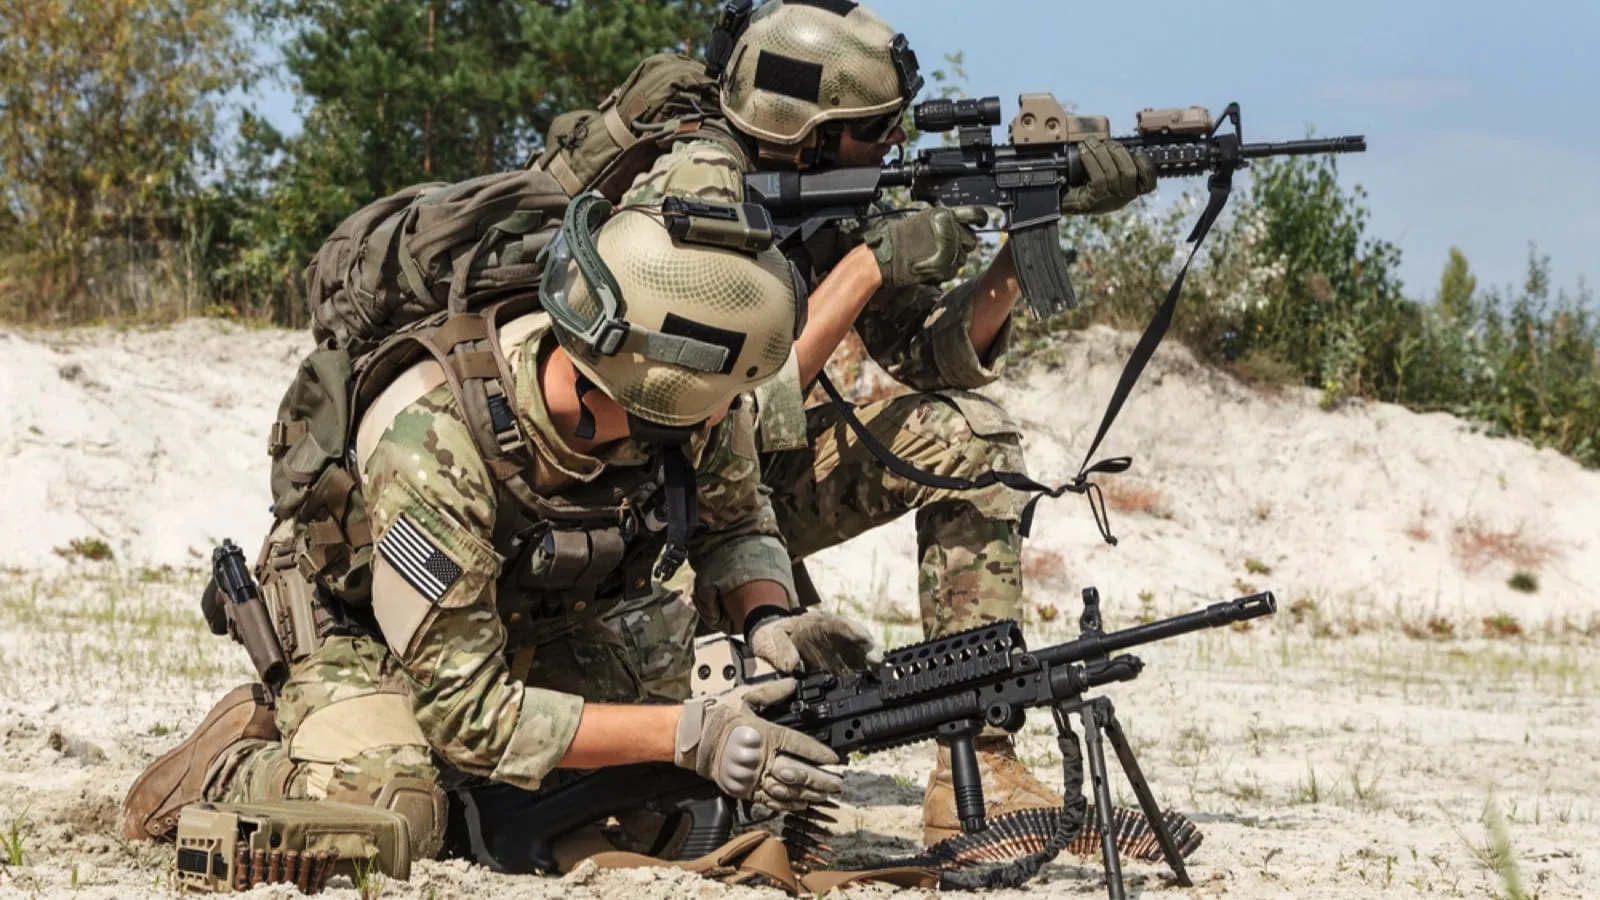 US army soldiers firing